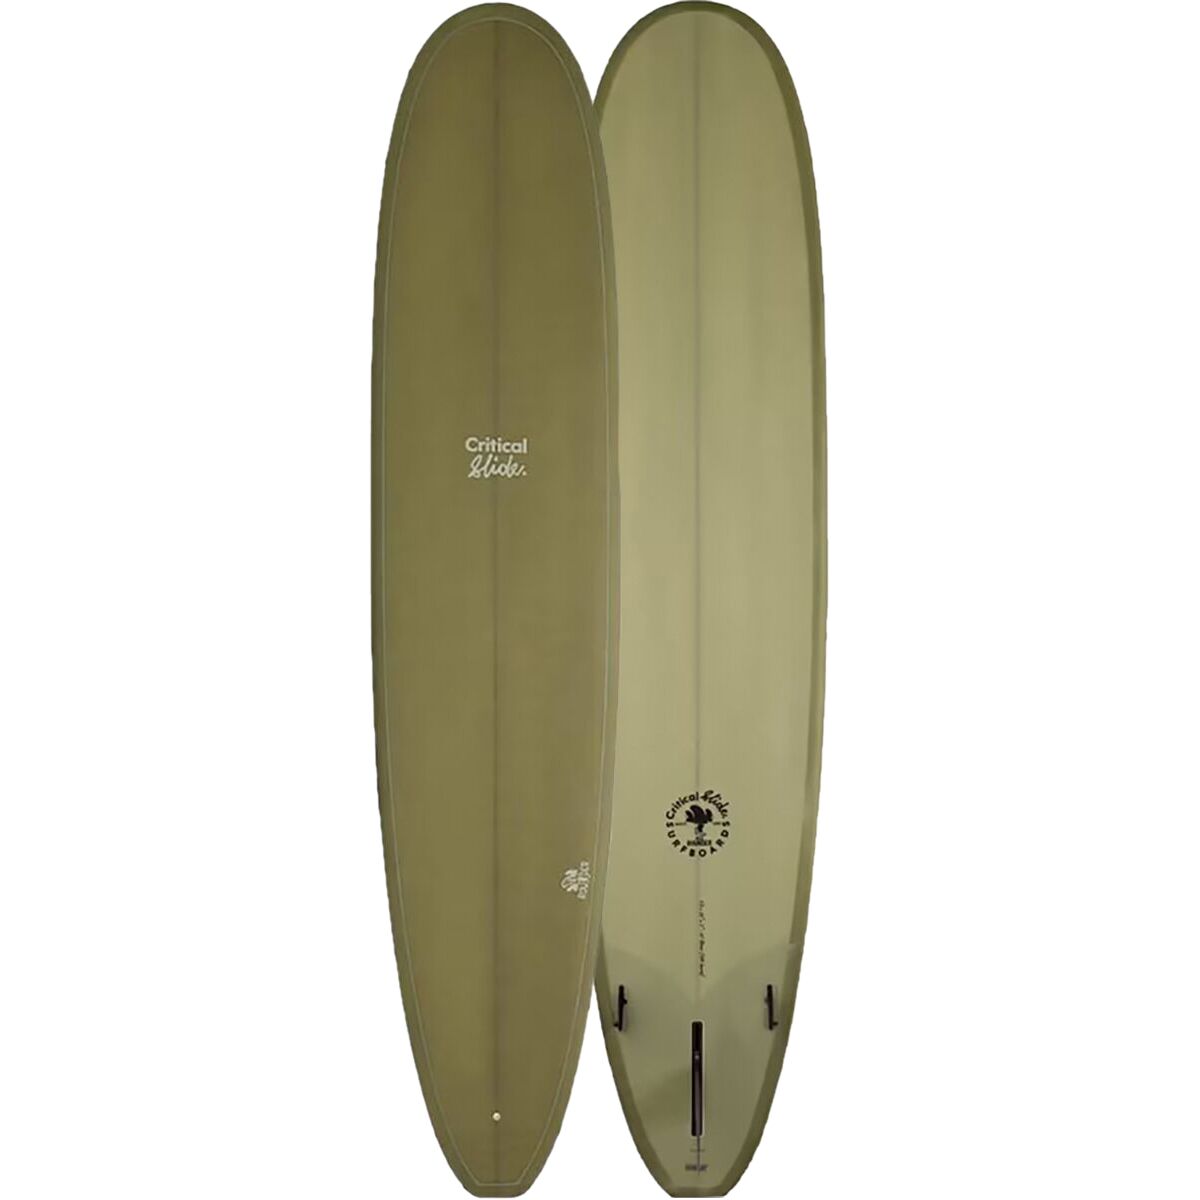 The Critical Slide Society All Rounder Longboard Surfboard